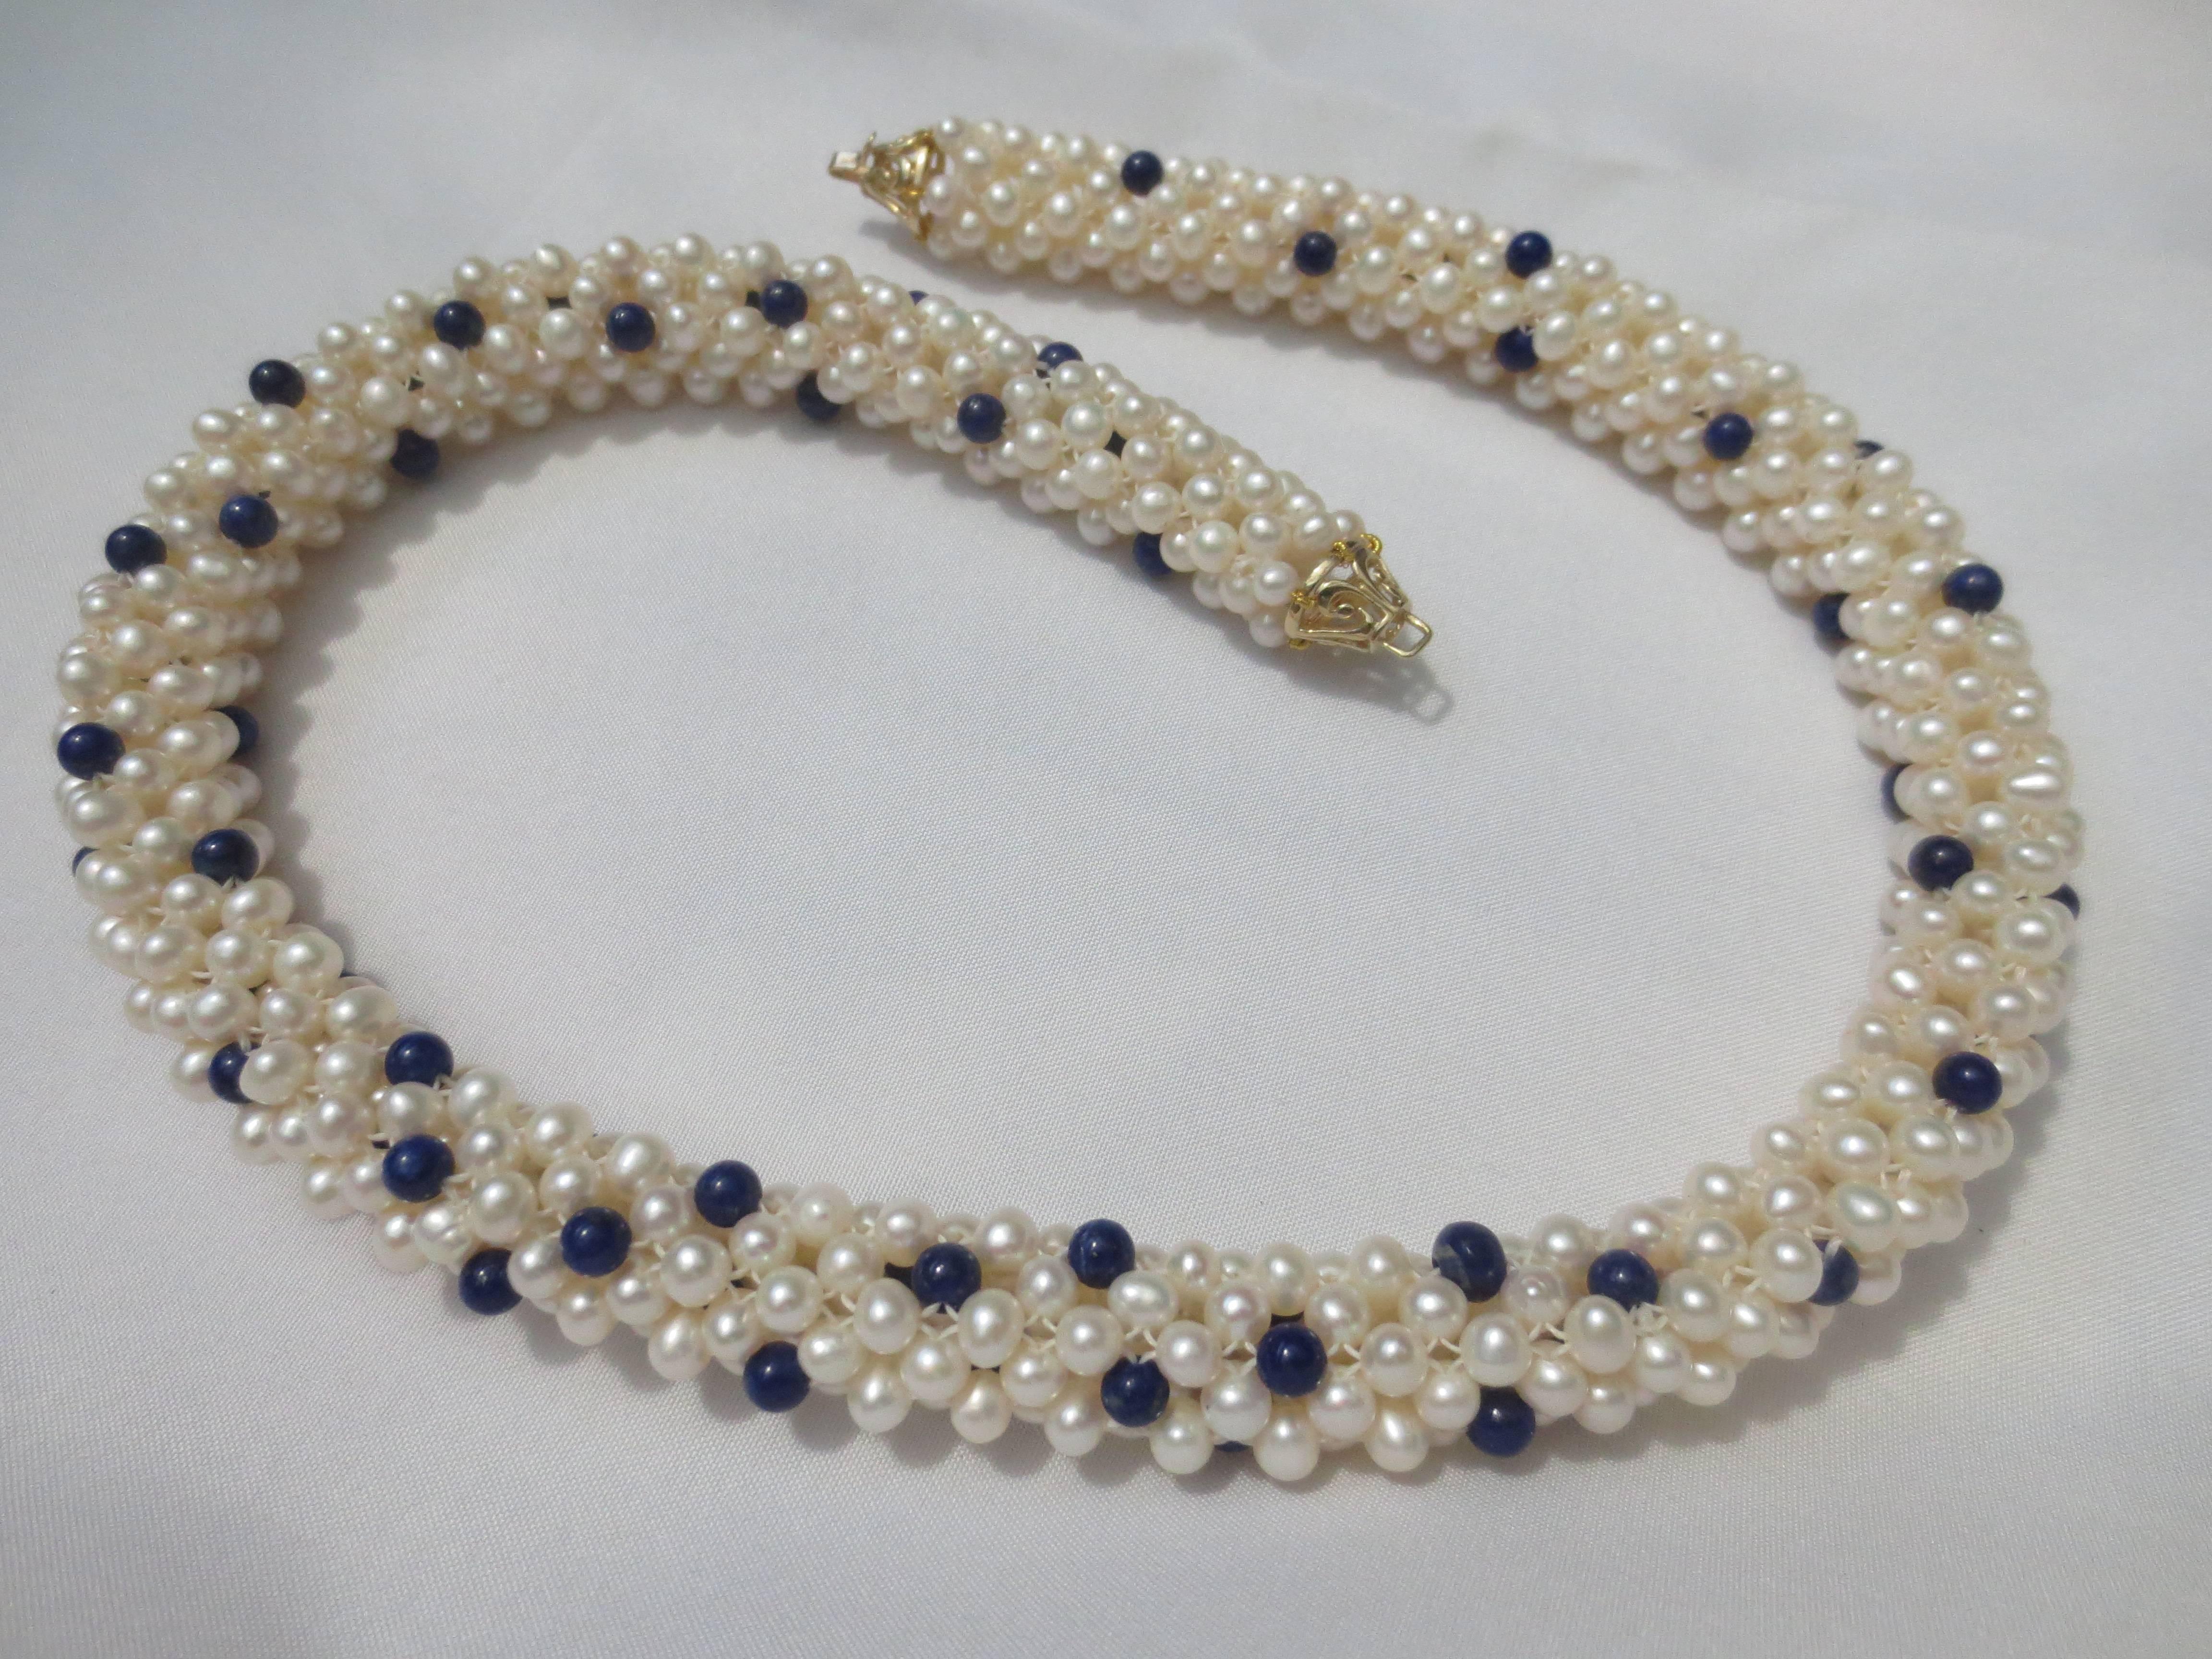 Lapis Lazuli and White Pearl Woven Rope Necklace with 14 k Yellow Gold Clasp 2